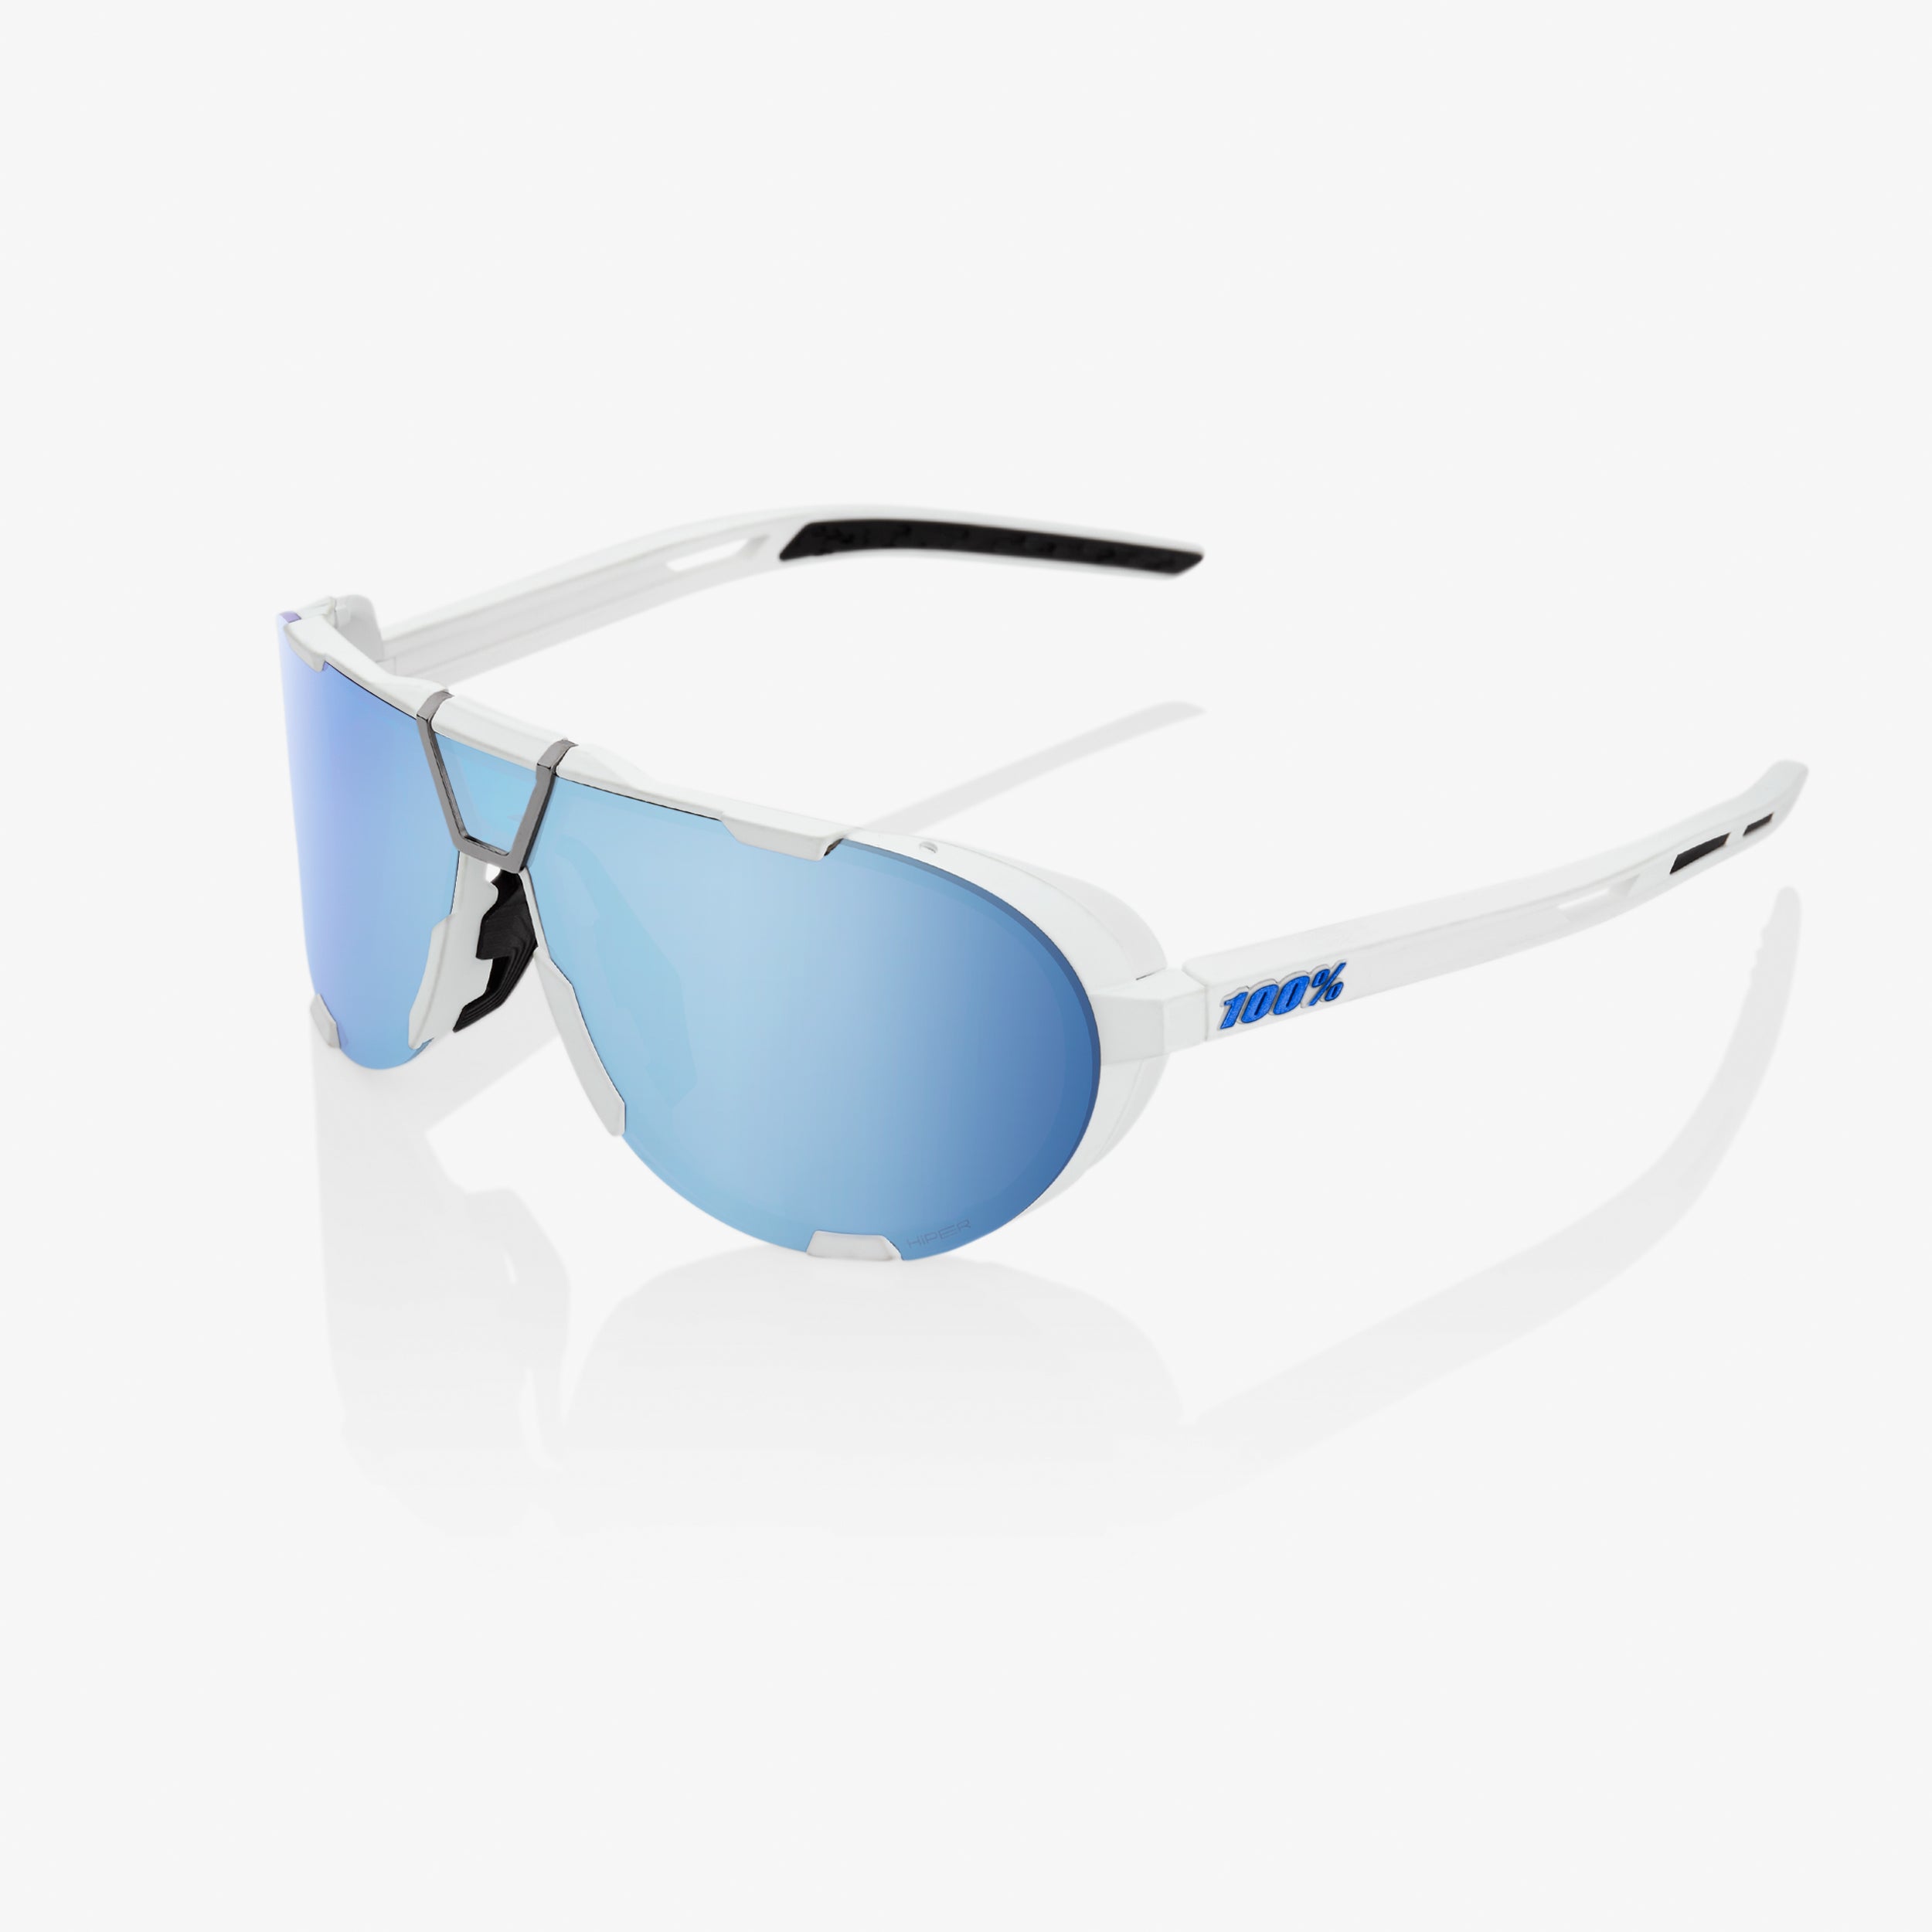 WESTCRAFT Soft Tact White HiPER Blue Multilayer Mirror Lens